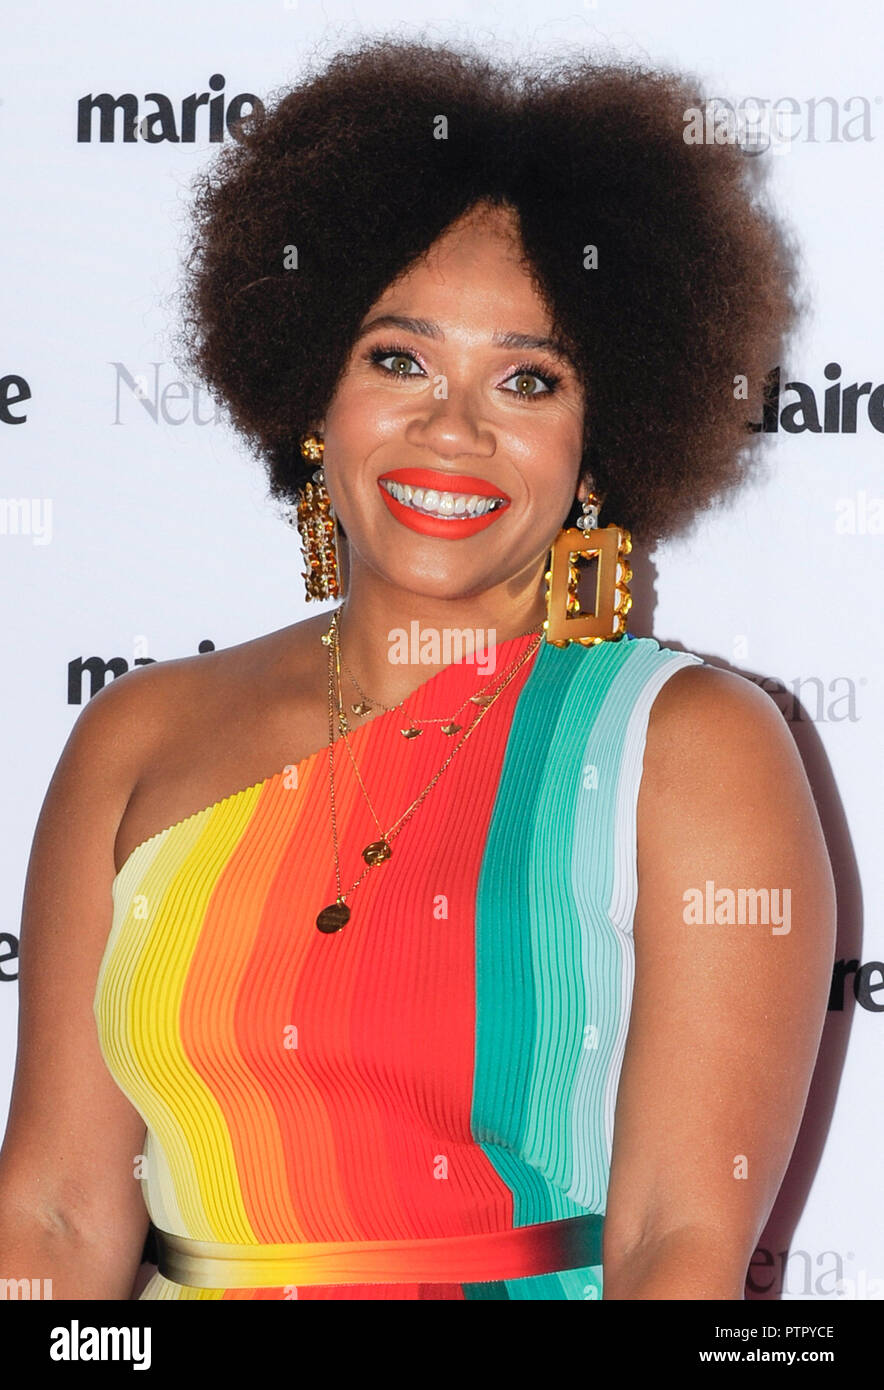 Photo Must Be Credited ©Alpha Press 080011 09/10/2018 Natalie Lee at the Marie Claire Future Shapers Awards 2018 held at Principal London in Russell Square, London. Stock Photo